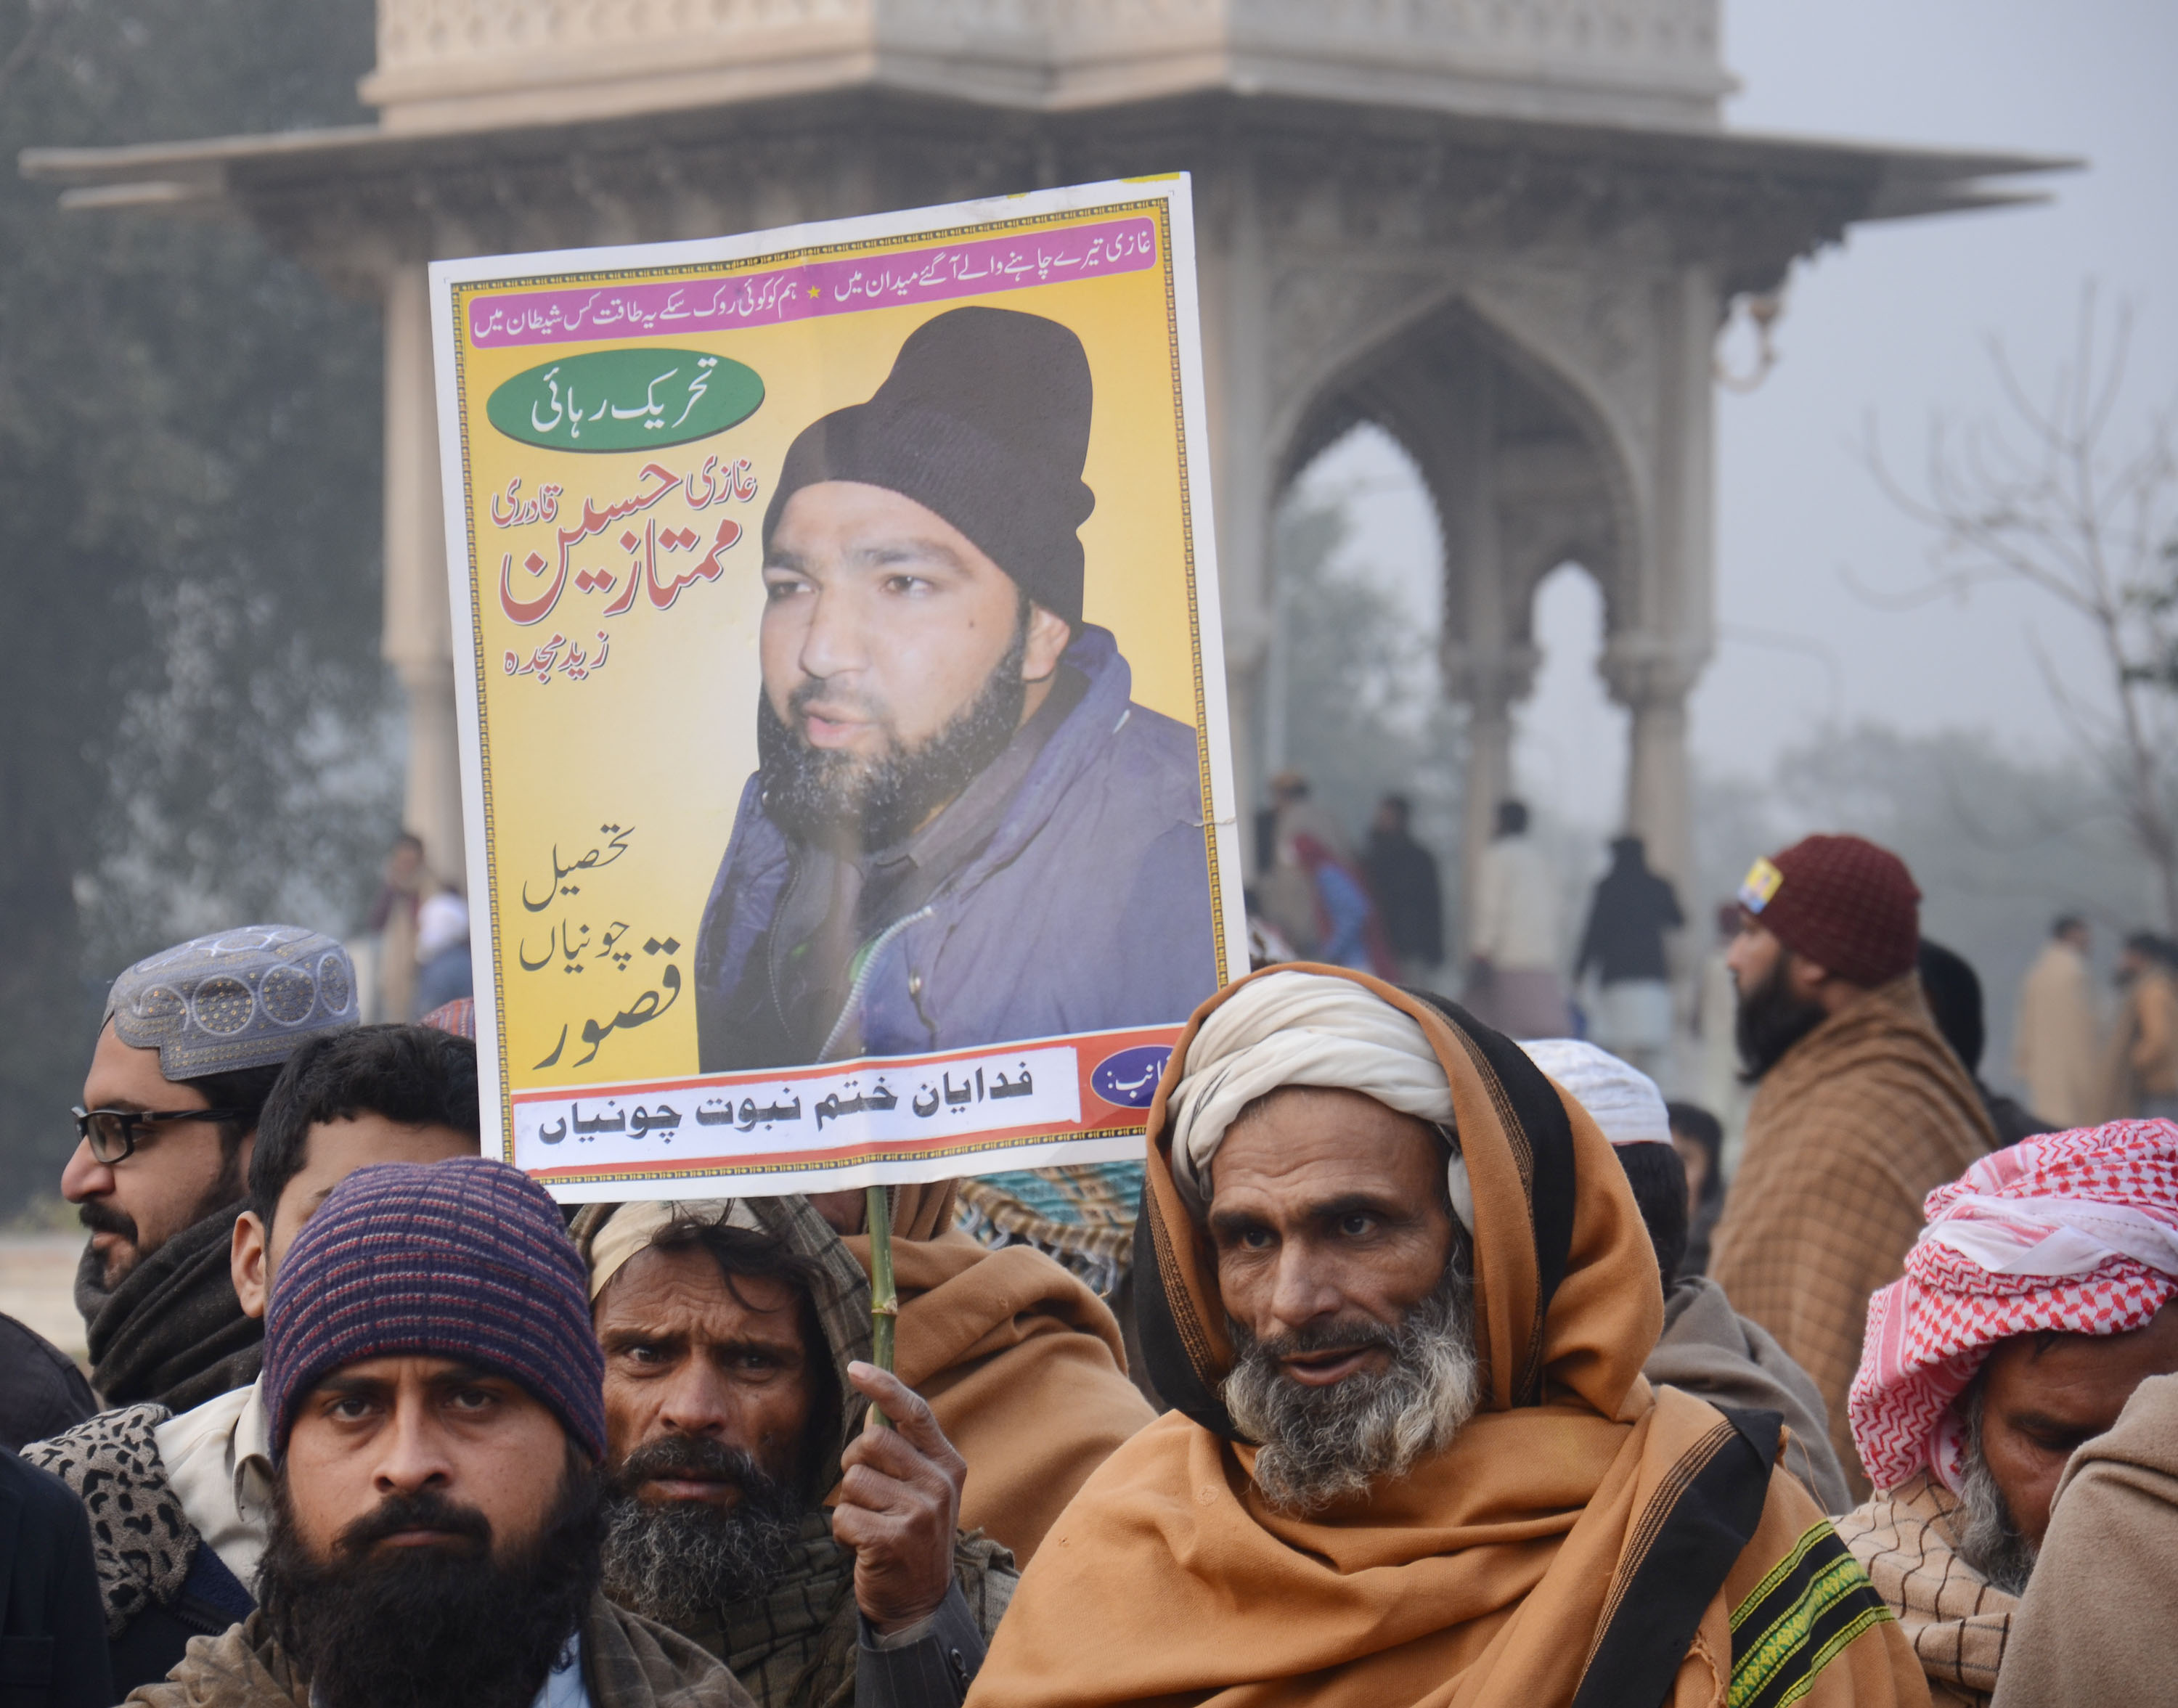 Man holding placard joins the rally in Lahore. Pakistani